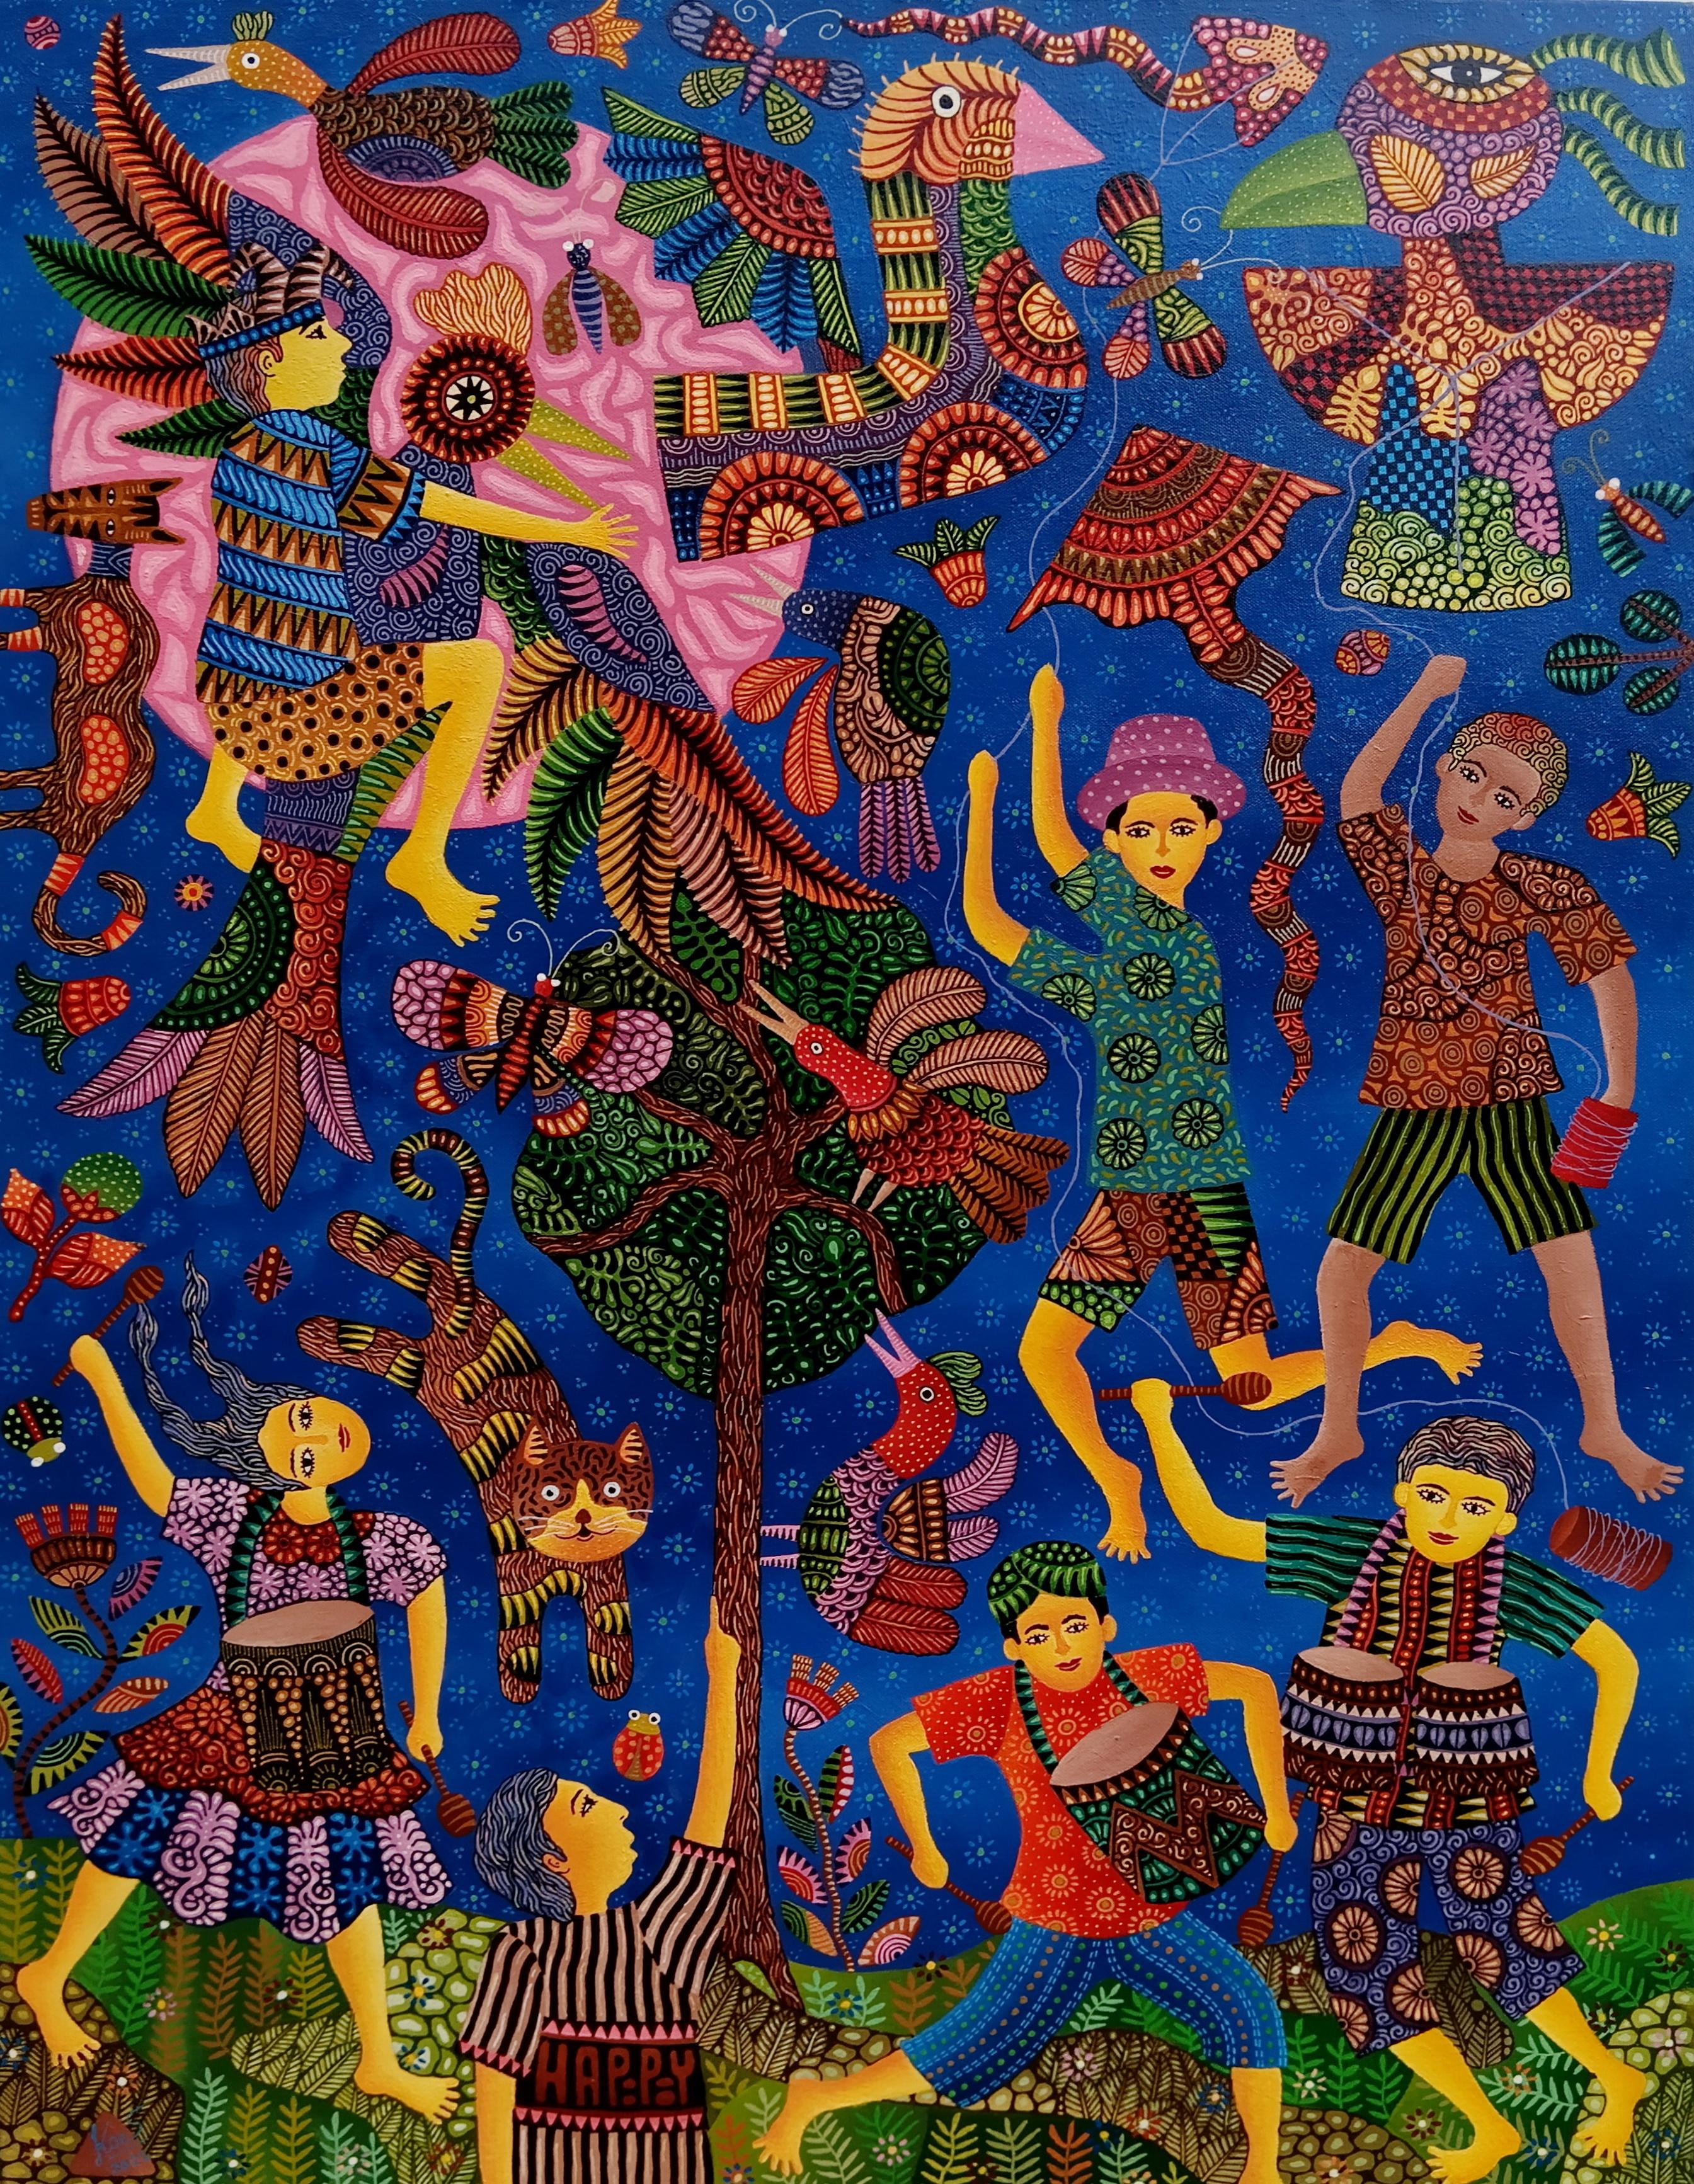 Kusbudiyanto is an Indonesian artist born in 1969 who lives & works in Jogjakarta, Indonesia.

This painting tells the happiness of children traveling to the zoo. Happiness can be seen on their faces. Children can see various kinds of animals such